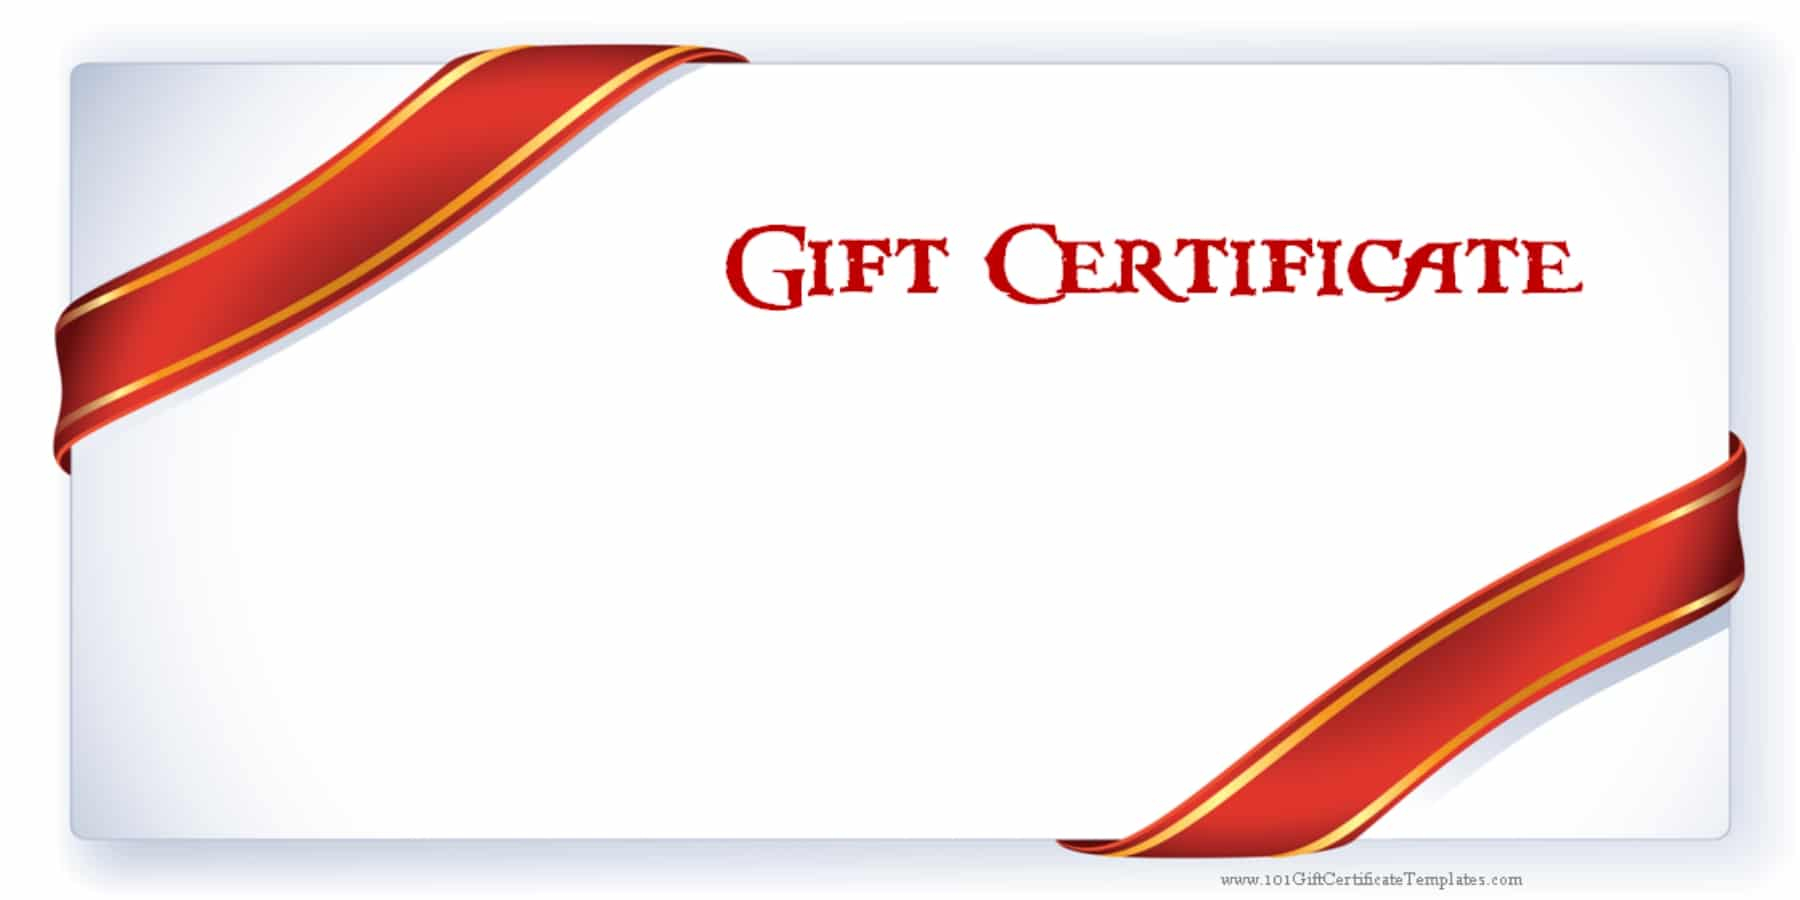 Printable Gift Certificate Templates - Free Printable Gift Coupons